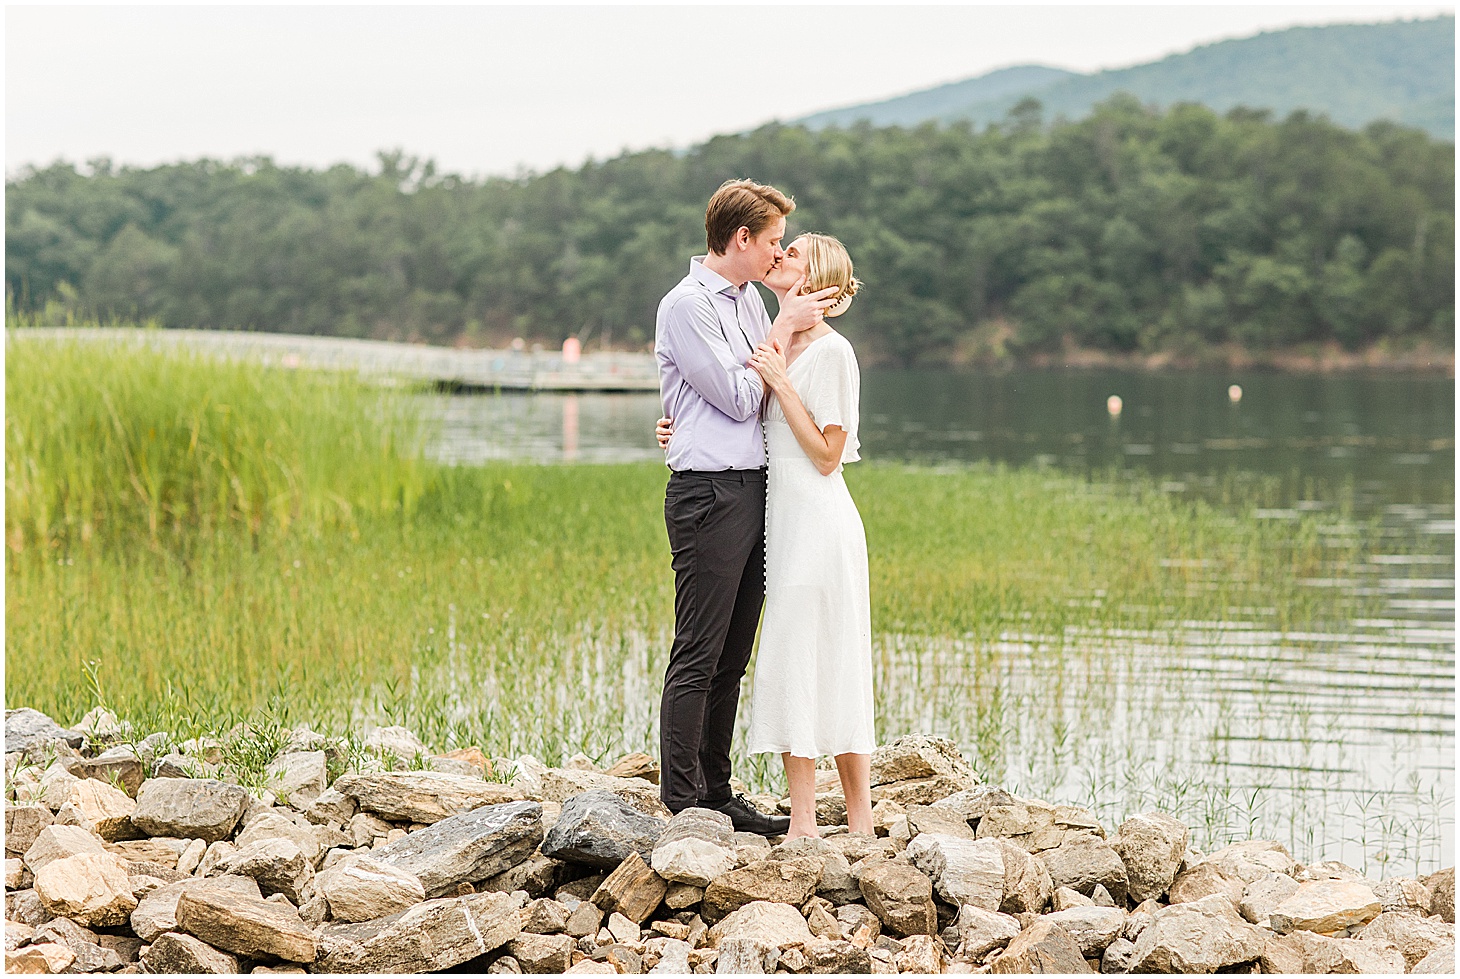 carvinscove_roanokeengagementsession_virginiaweddingphotographer_vaweddingphotographer_photo_0052-1.jpg